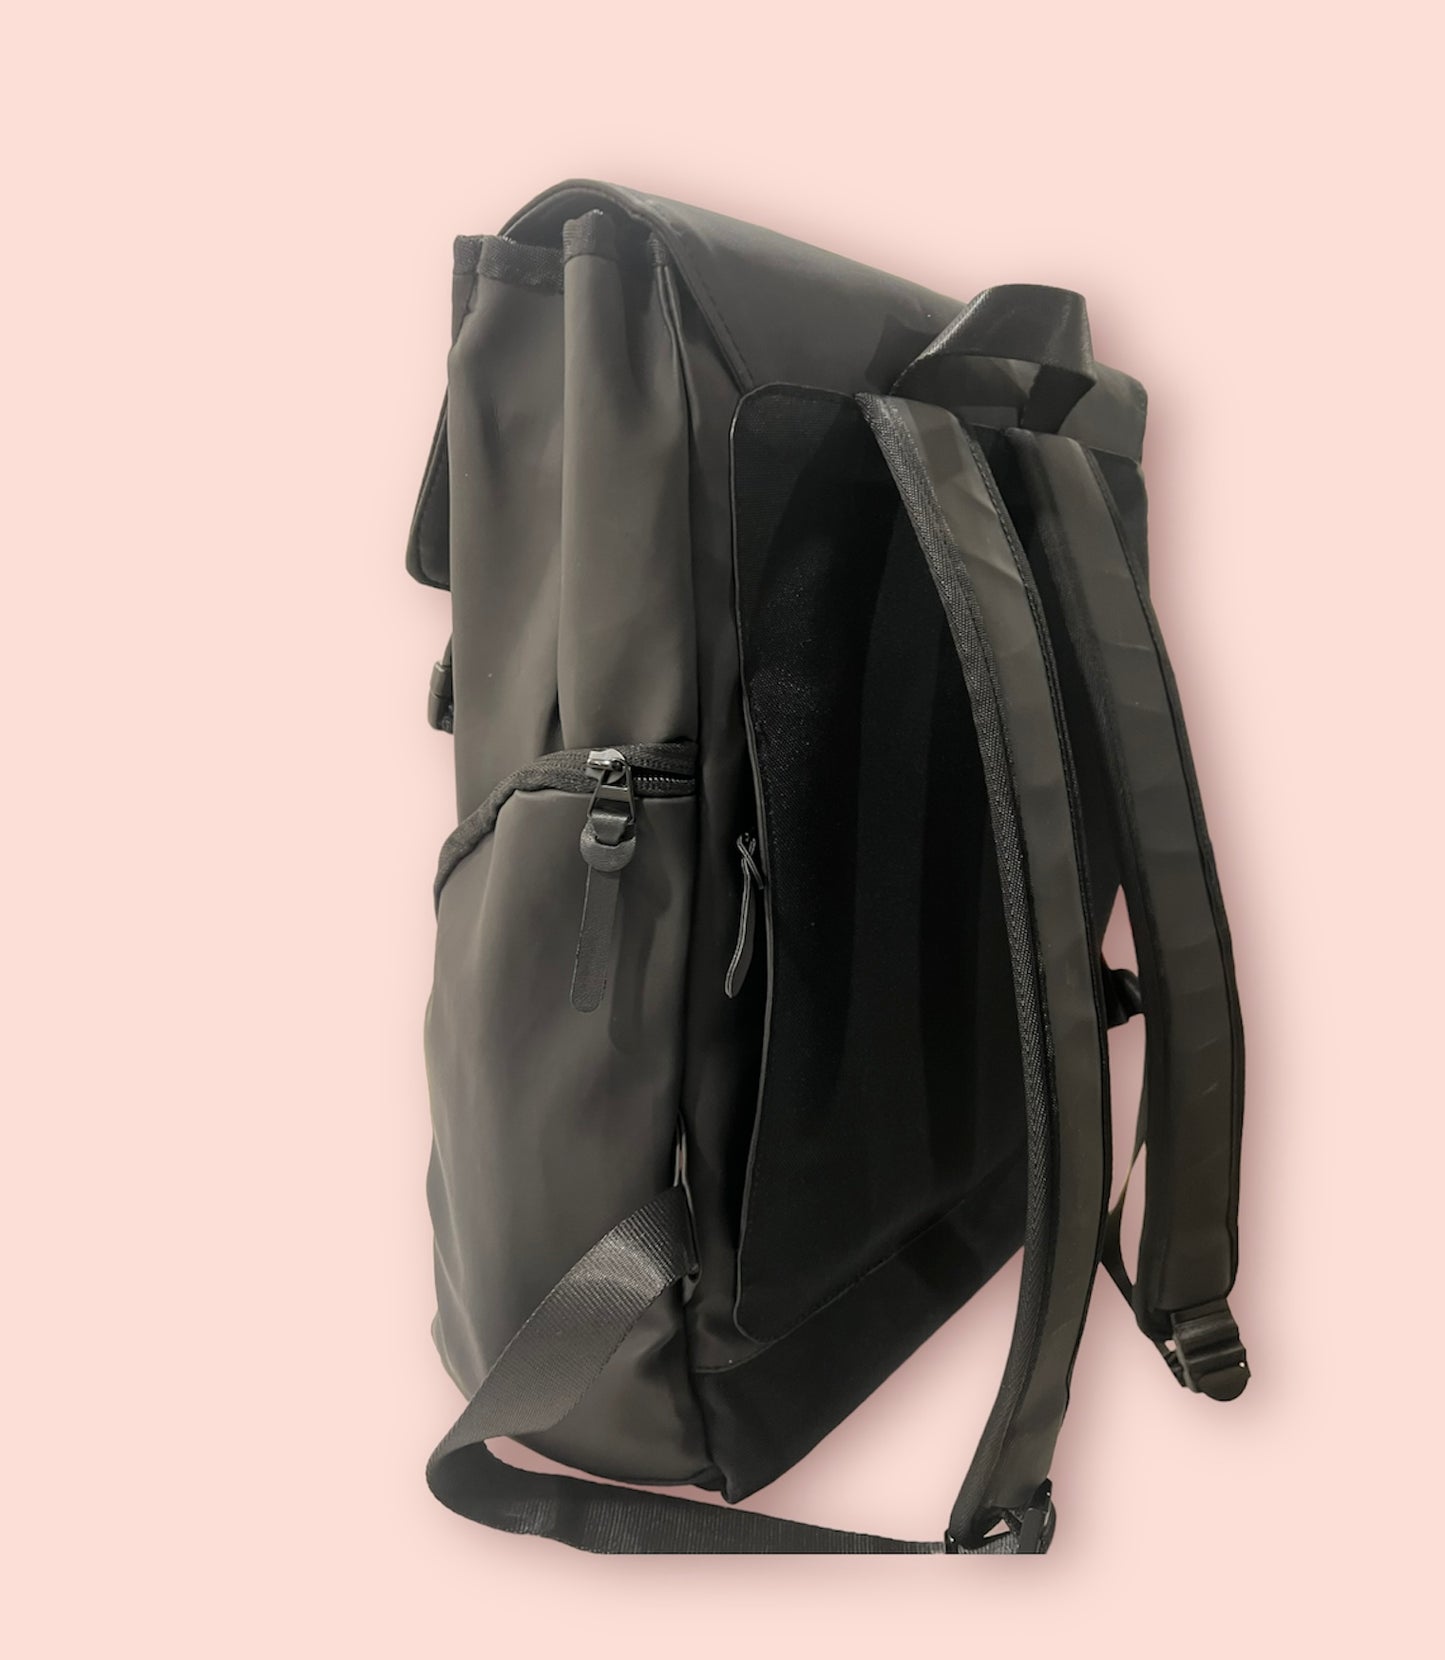 GALLERIA COLLECION by Neal Naus "Shadows Travel Backpack"